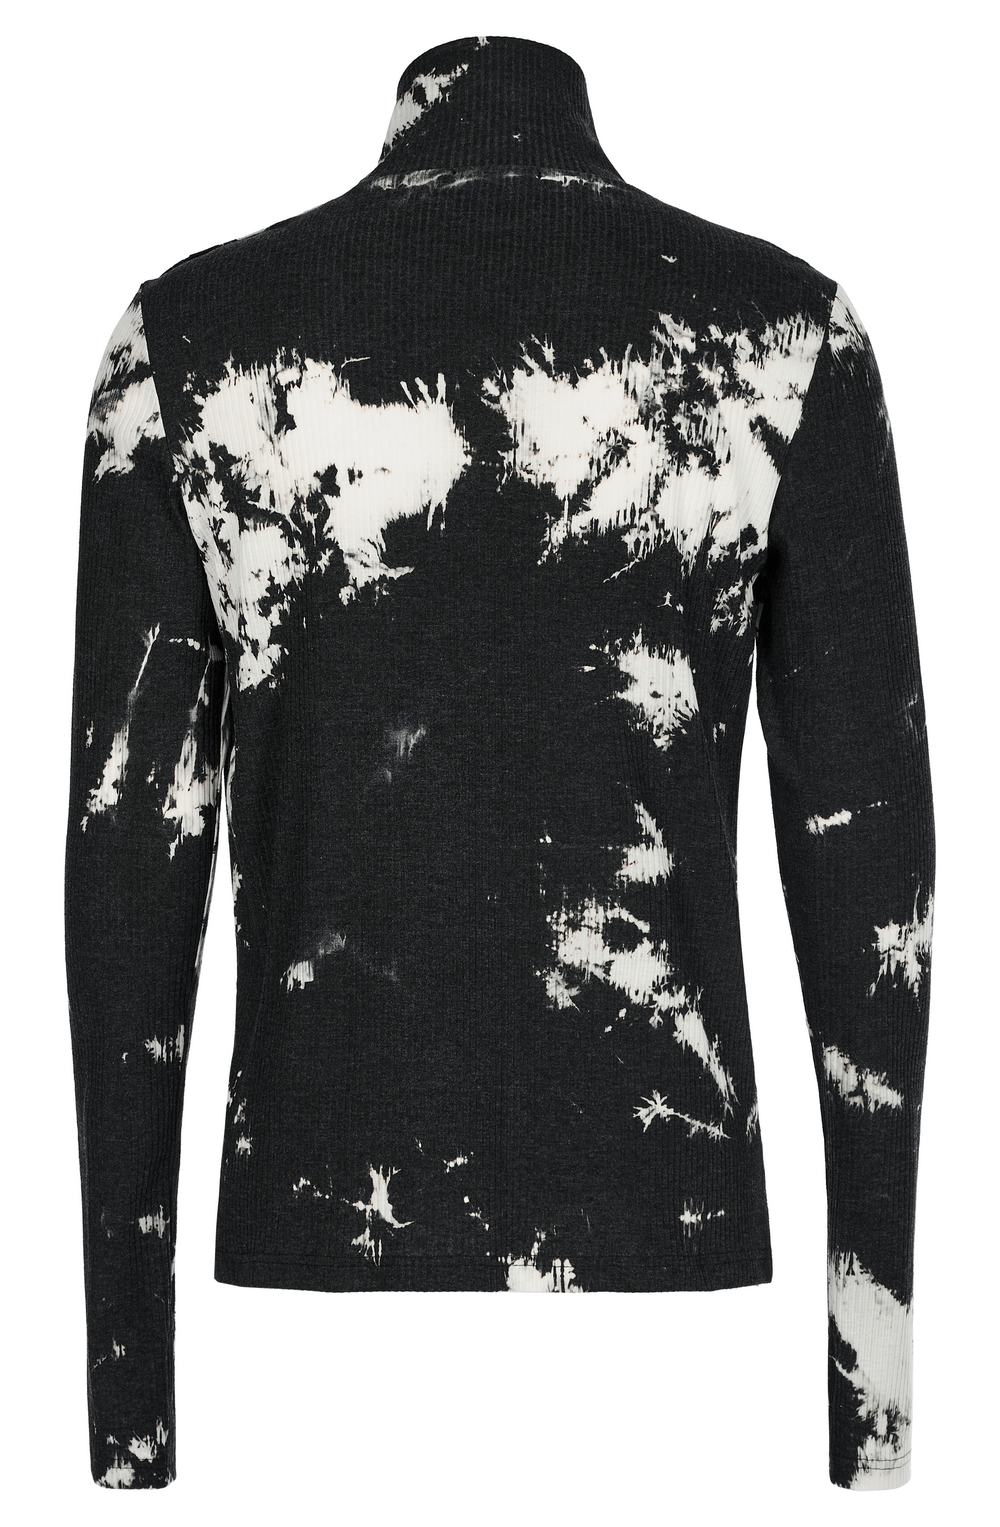 Men's Distressed Tie-Dye Punk Pullover With Eyelets - HARD'N'HEAVY